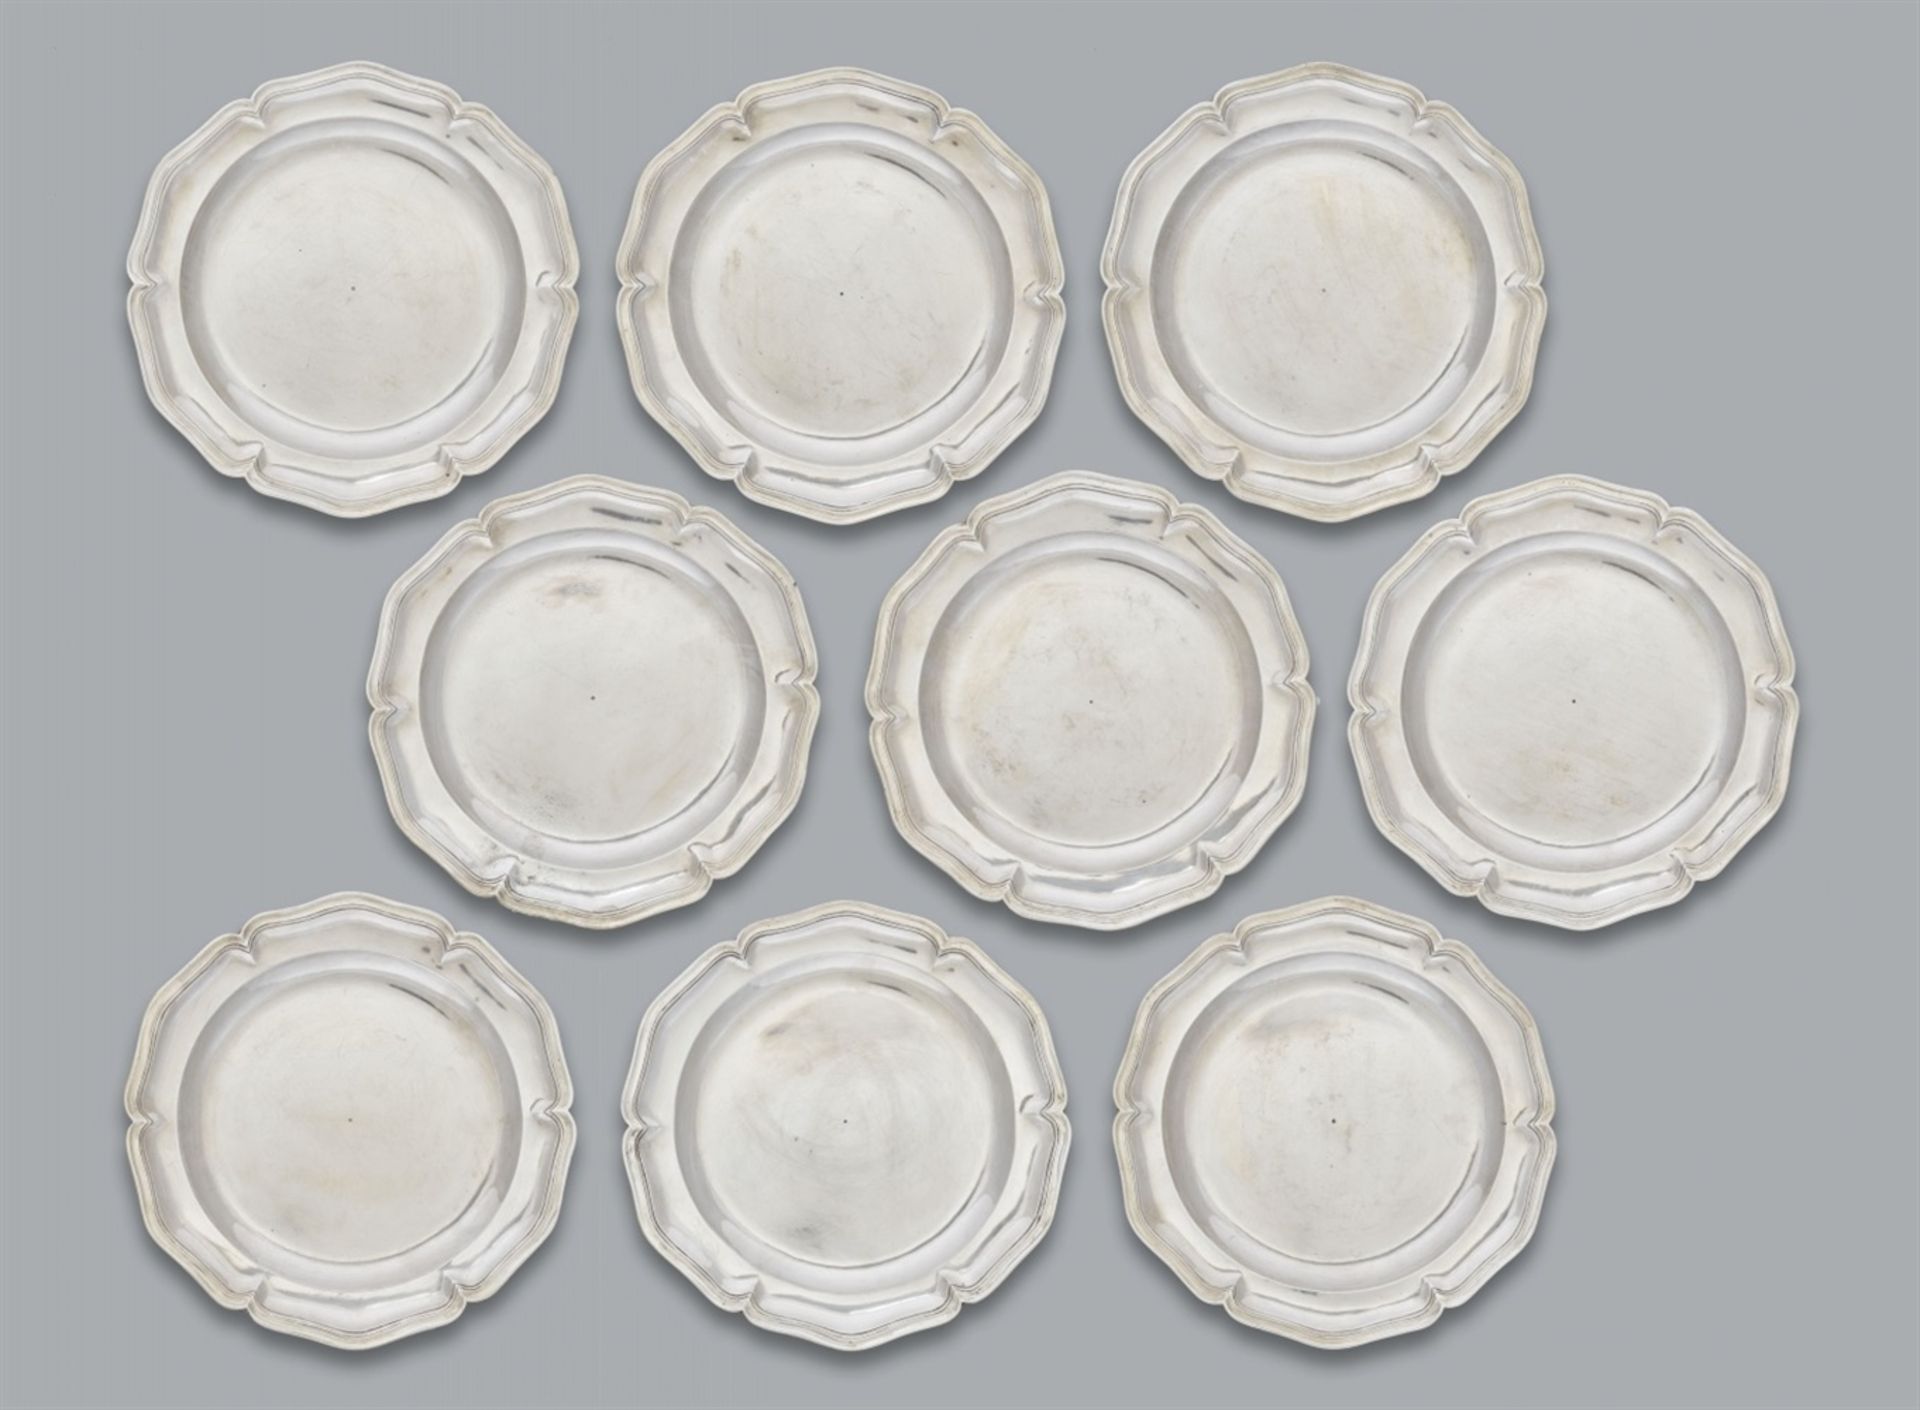 Nine Spanish silver platesRound scalloped dishes with moulded rims. Engraved with the owner's